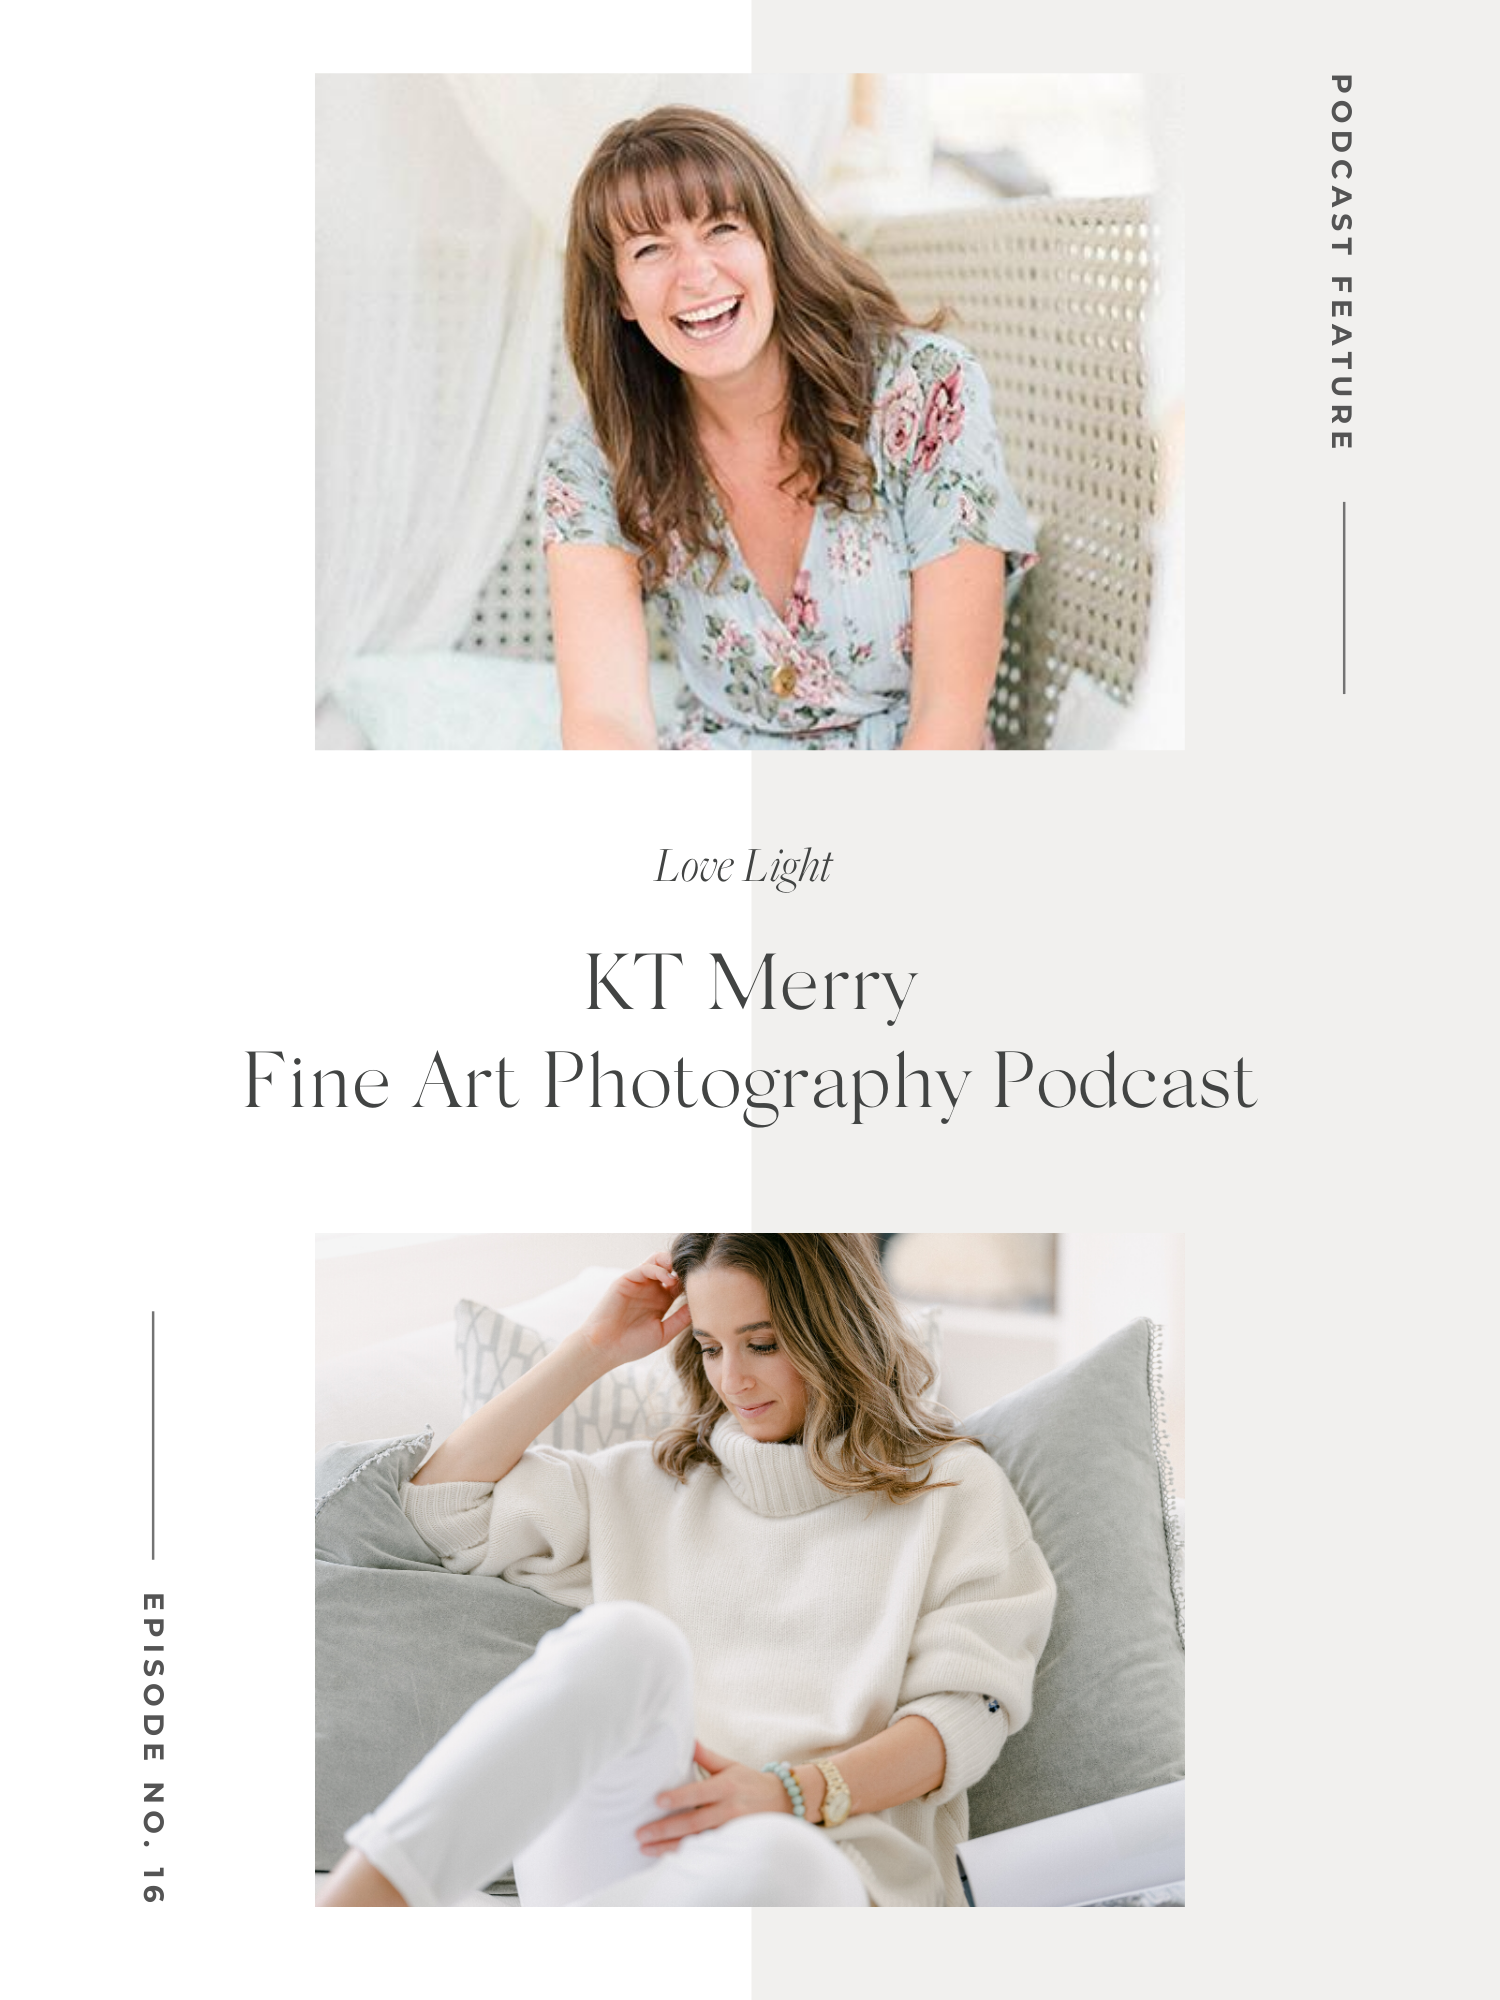 Fine Art Photography podcast with KT Merry